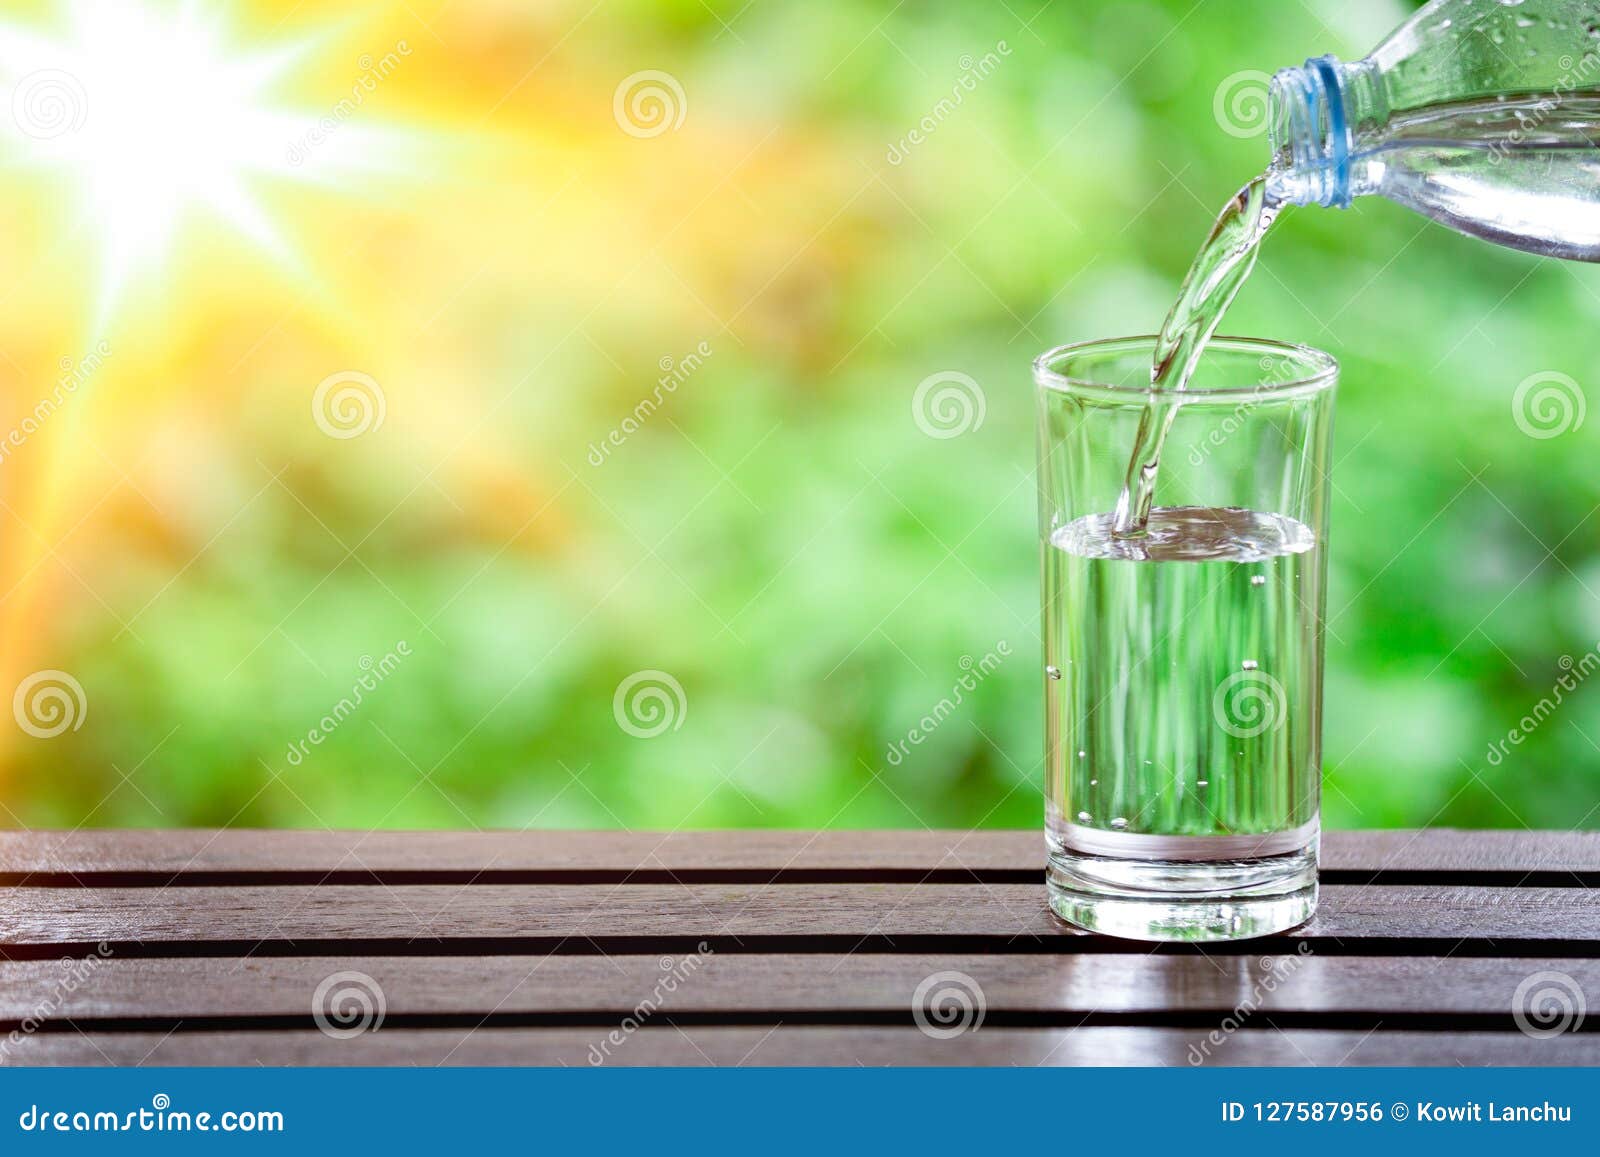 Drink Water Pouring into Glass on Wooden Table Over Sunlight with Natural  Lighting and Background Texture Stock Photo - Image of lighting, hand:  127587956